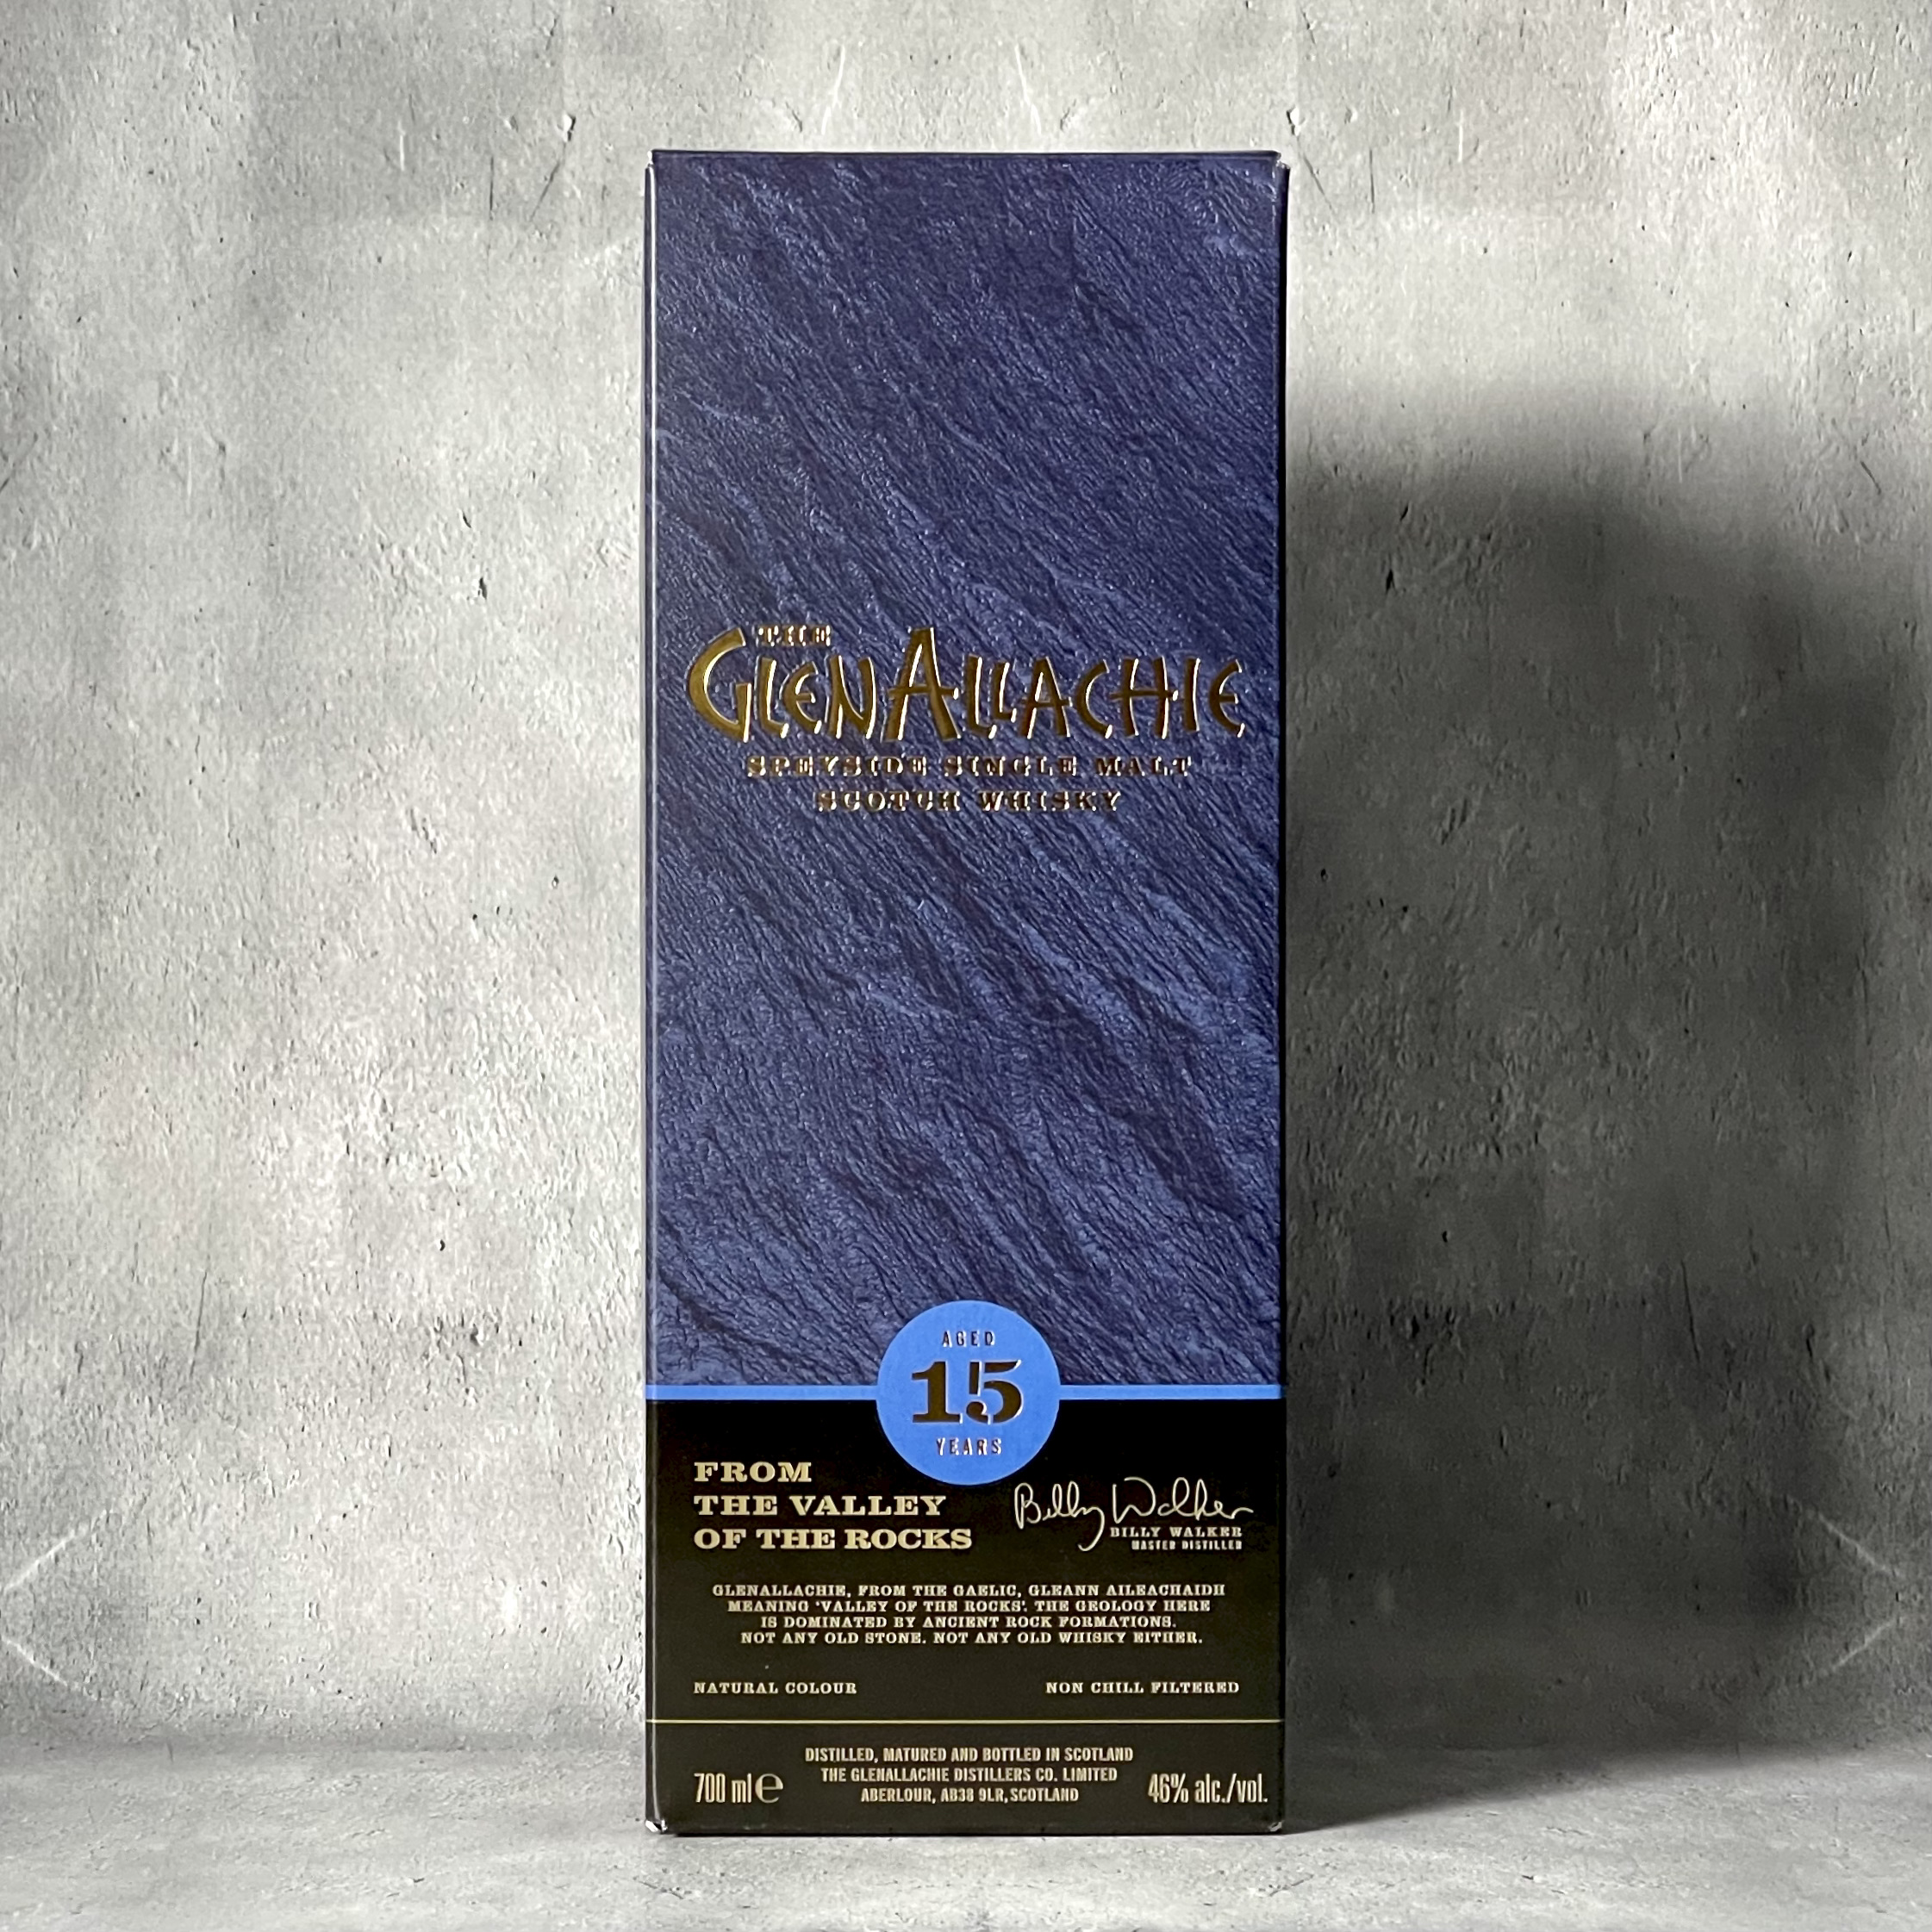 WHISKY LOVERS ONLINESHOP / グレンアラヒー 15年